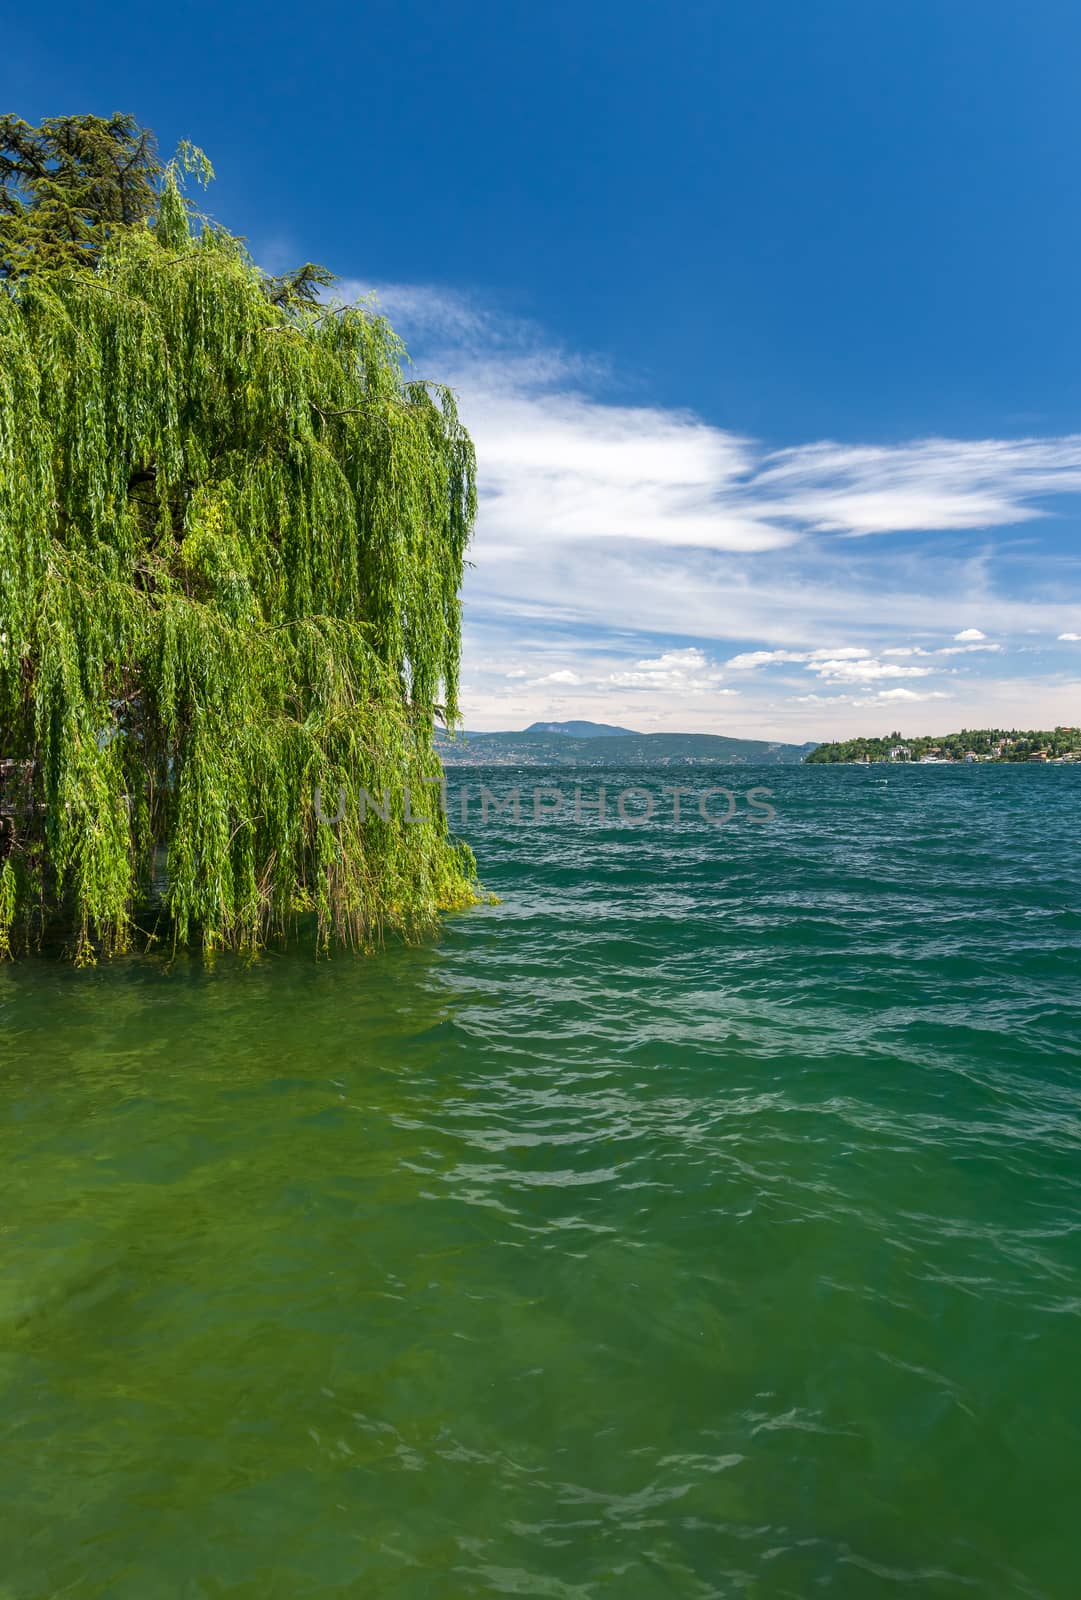 The green tree on a lake Garda with mountains as background by master1305